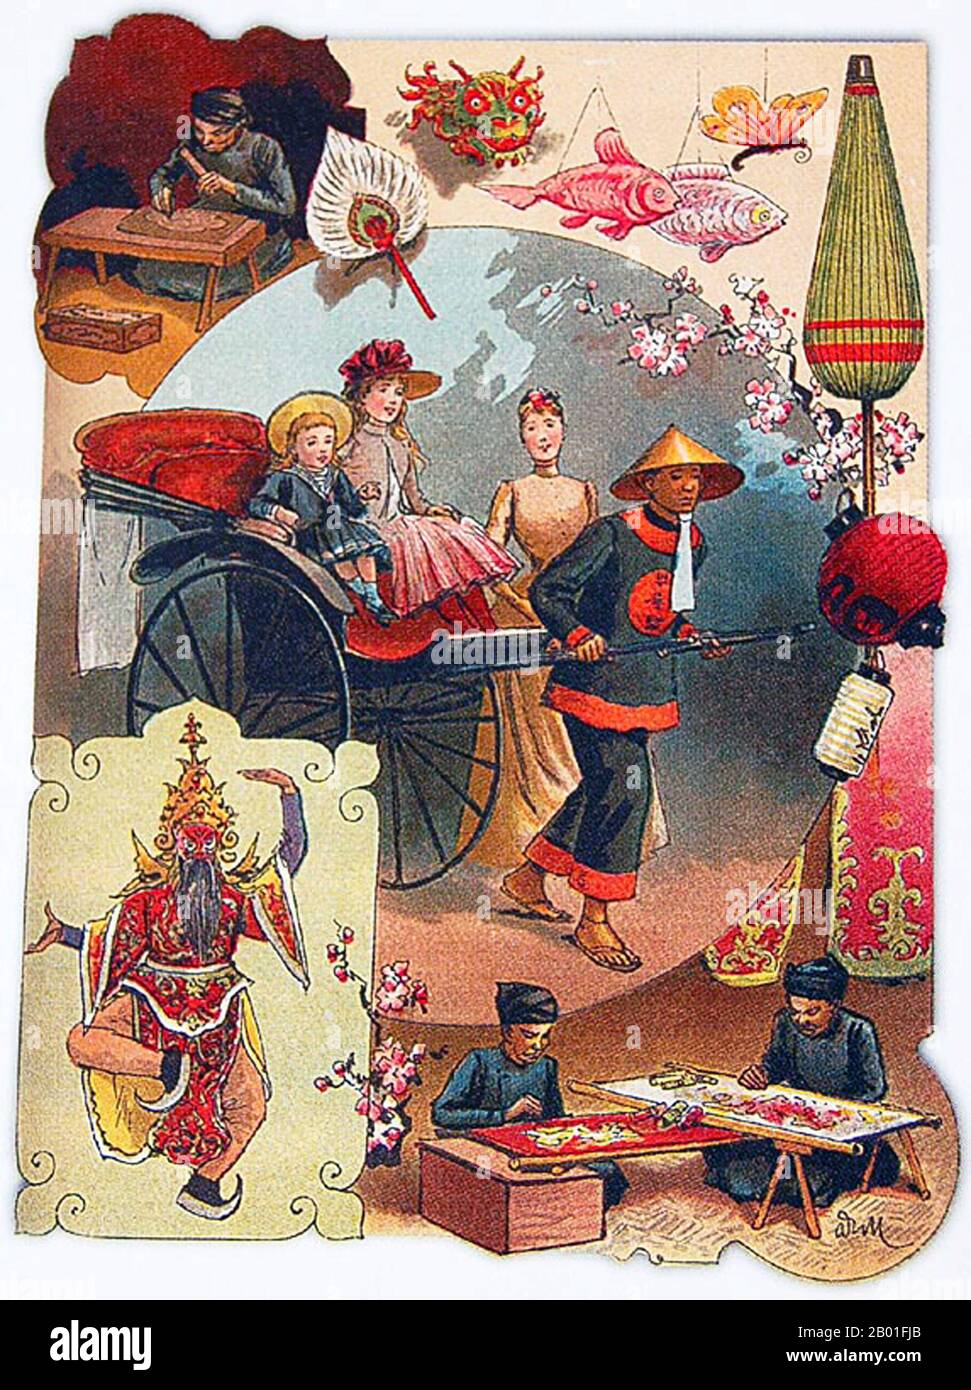 Vietnam: Advertisement for Expo Indochine, Paris, 1889.  In 1863, Cambodia became a protectorate of France. In October 1887, the French announced the formation of the Union Indochinoise (Union of Indochina), which at that time comprised Cambodia and the three regions of Vietnam (Tonkin, Annam, and Cochinchina). In 1893, Laos was also annexed. Stock Photo